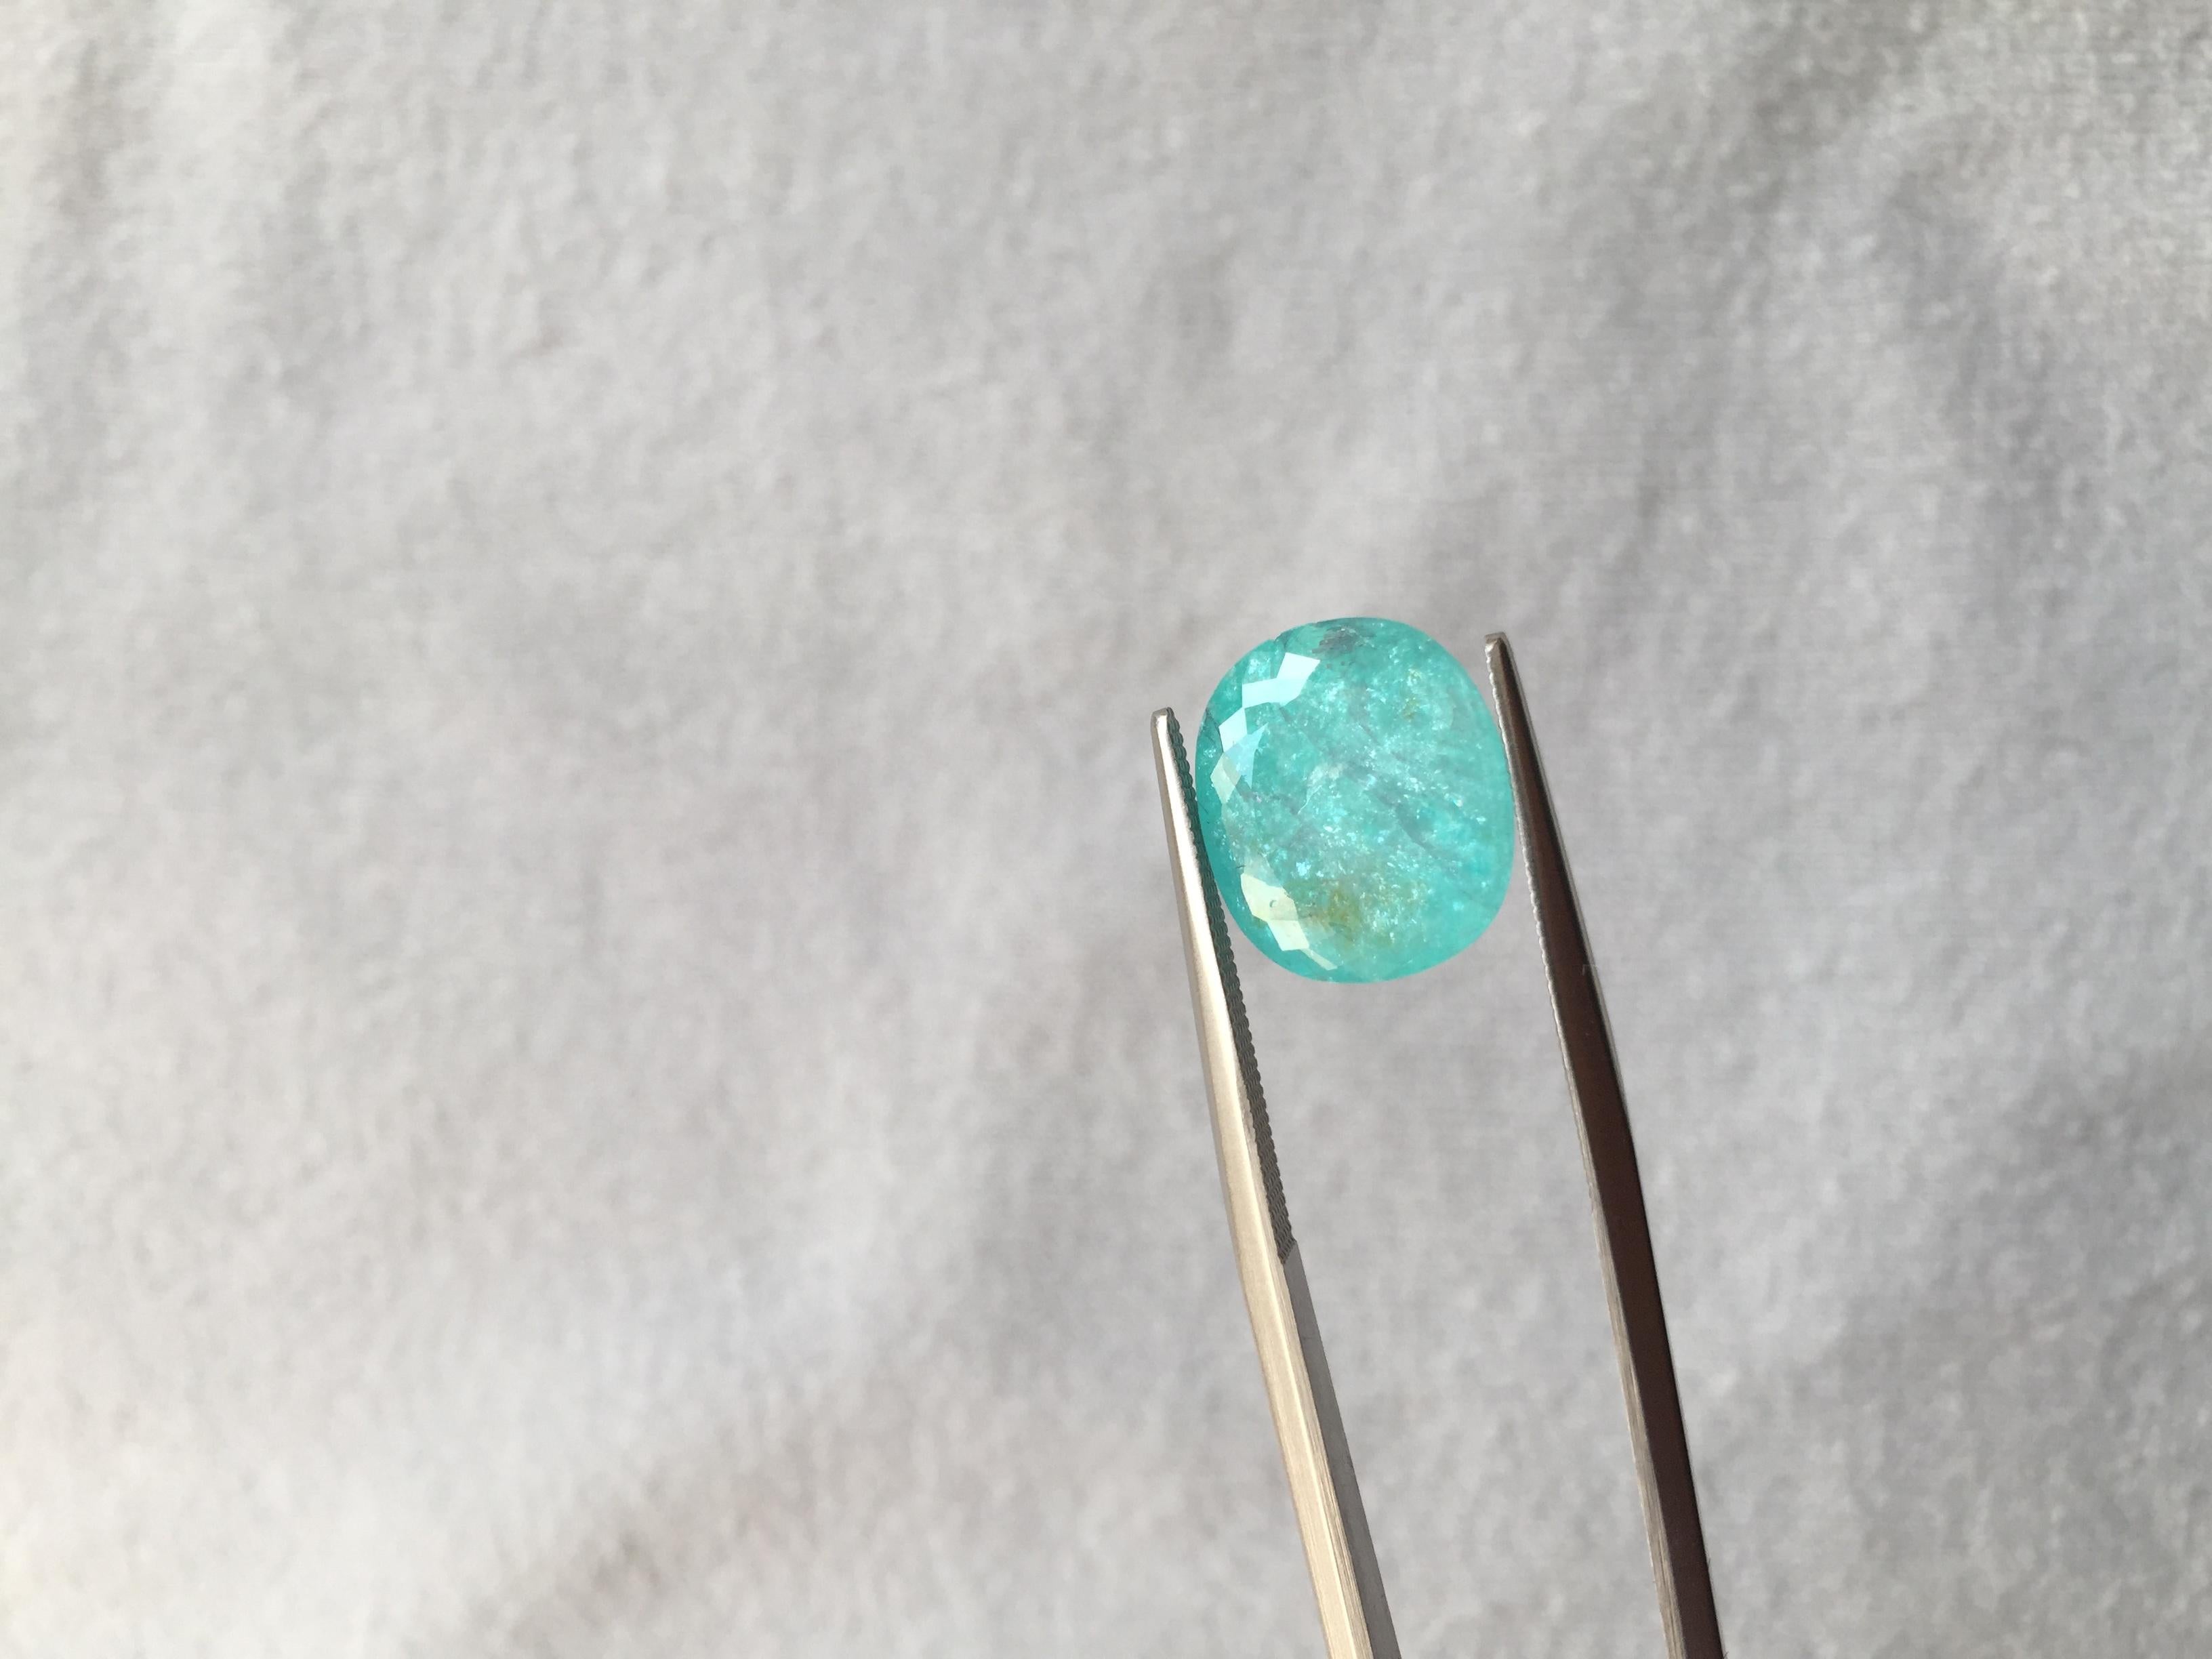 Exceptional 8.17 Carats Paraiba Tourmaline Oval Cut Stone for Fine Jewellery  